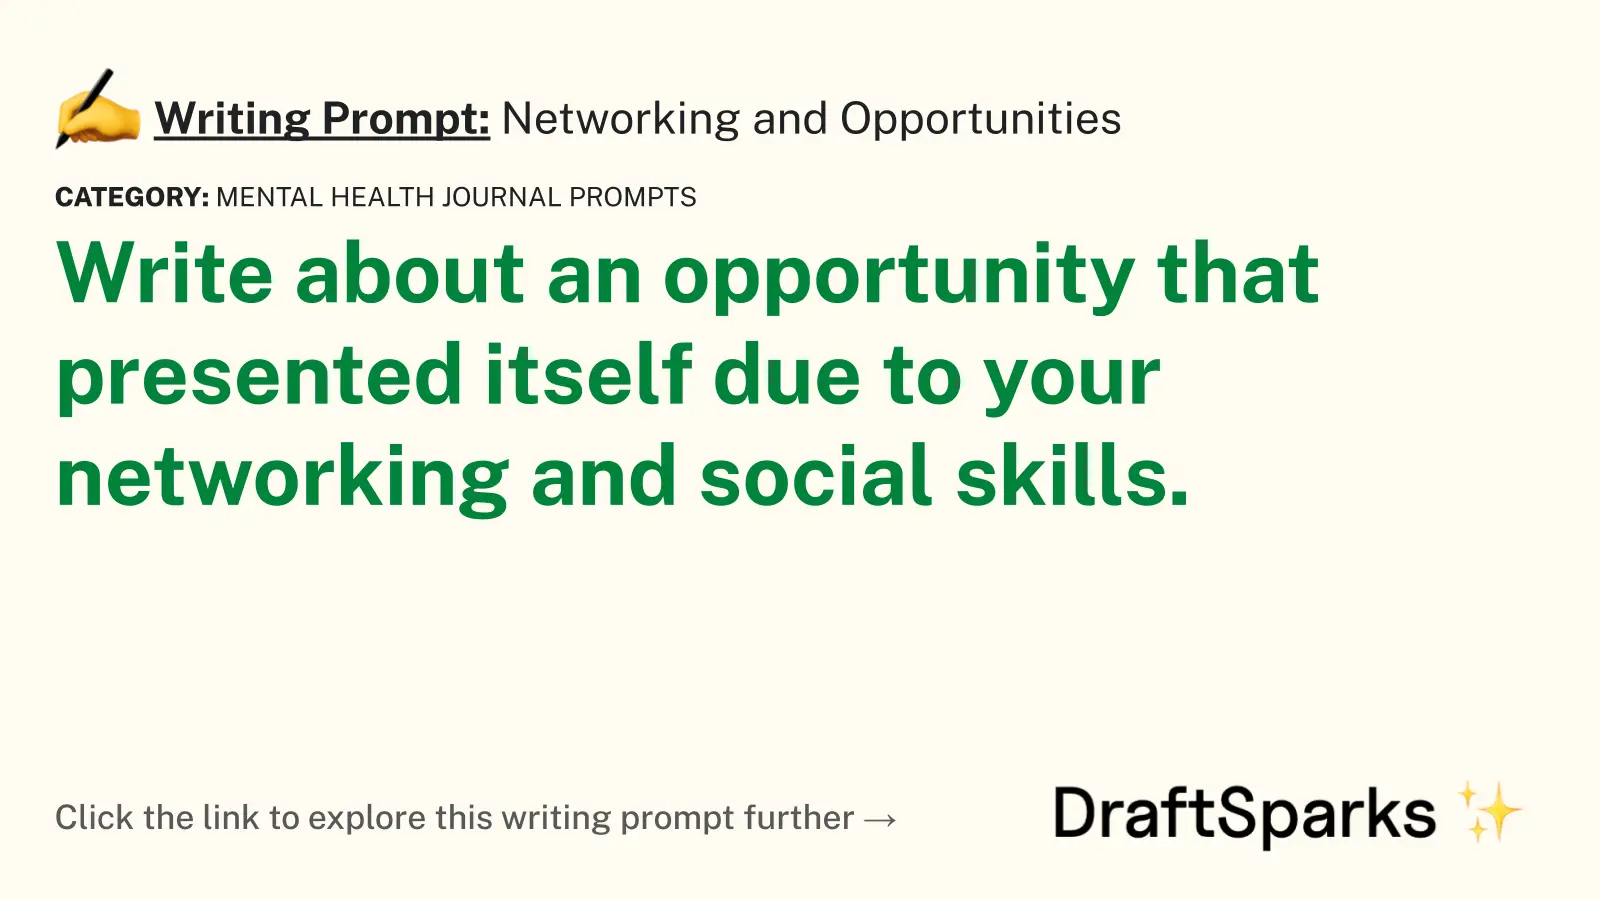 Networking and Opportunities